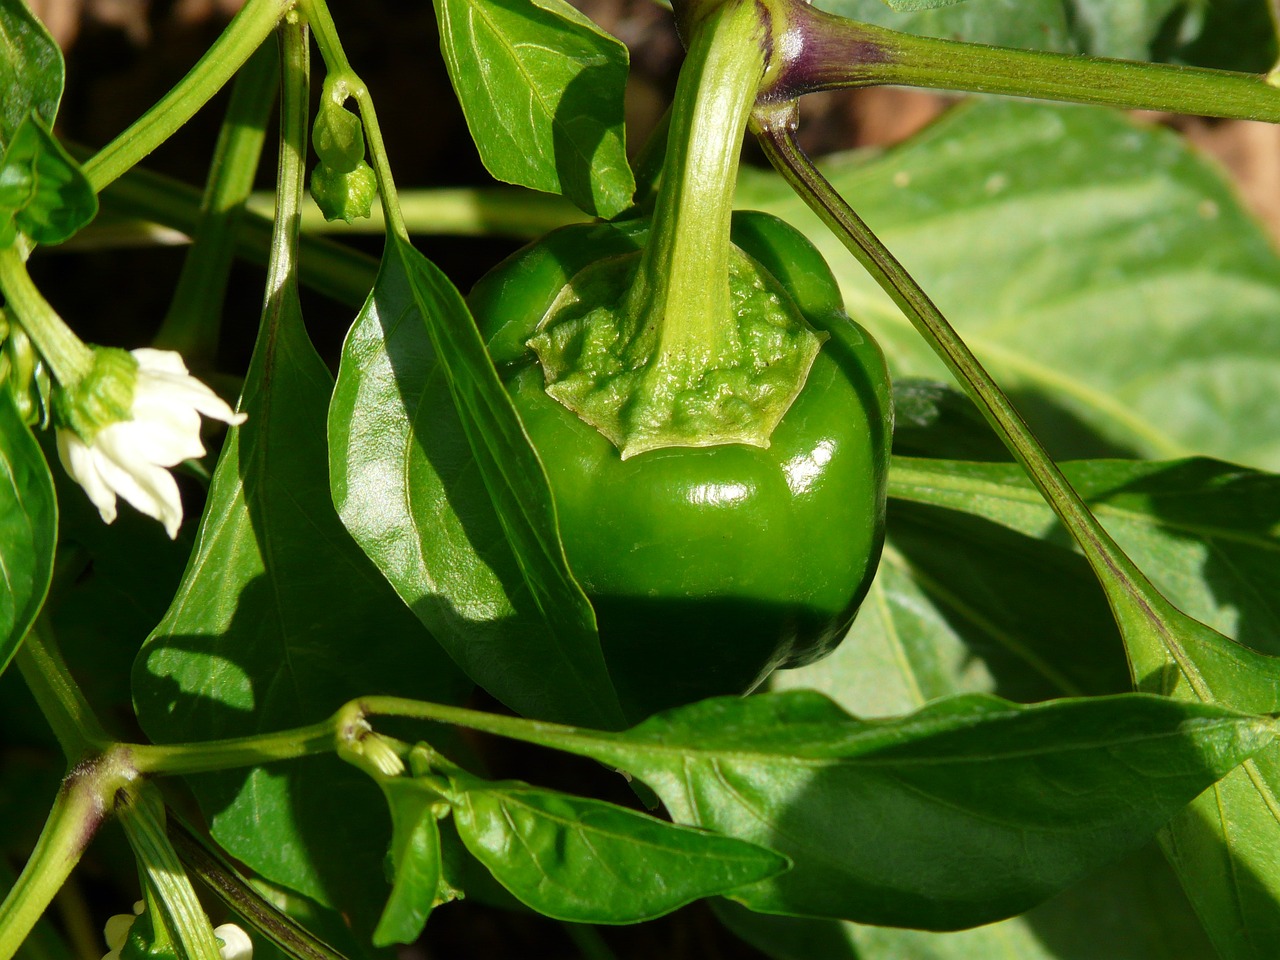 a close up of a green pepper on a plant, a picture, by Robert Brackman, pixabay, photo taken from far away, pot-bellied, sepals forming helmet, shaded